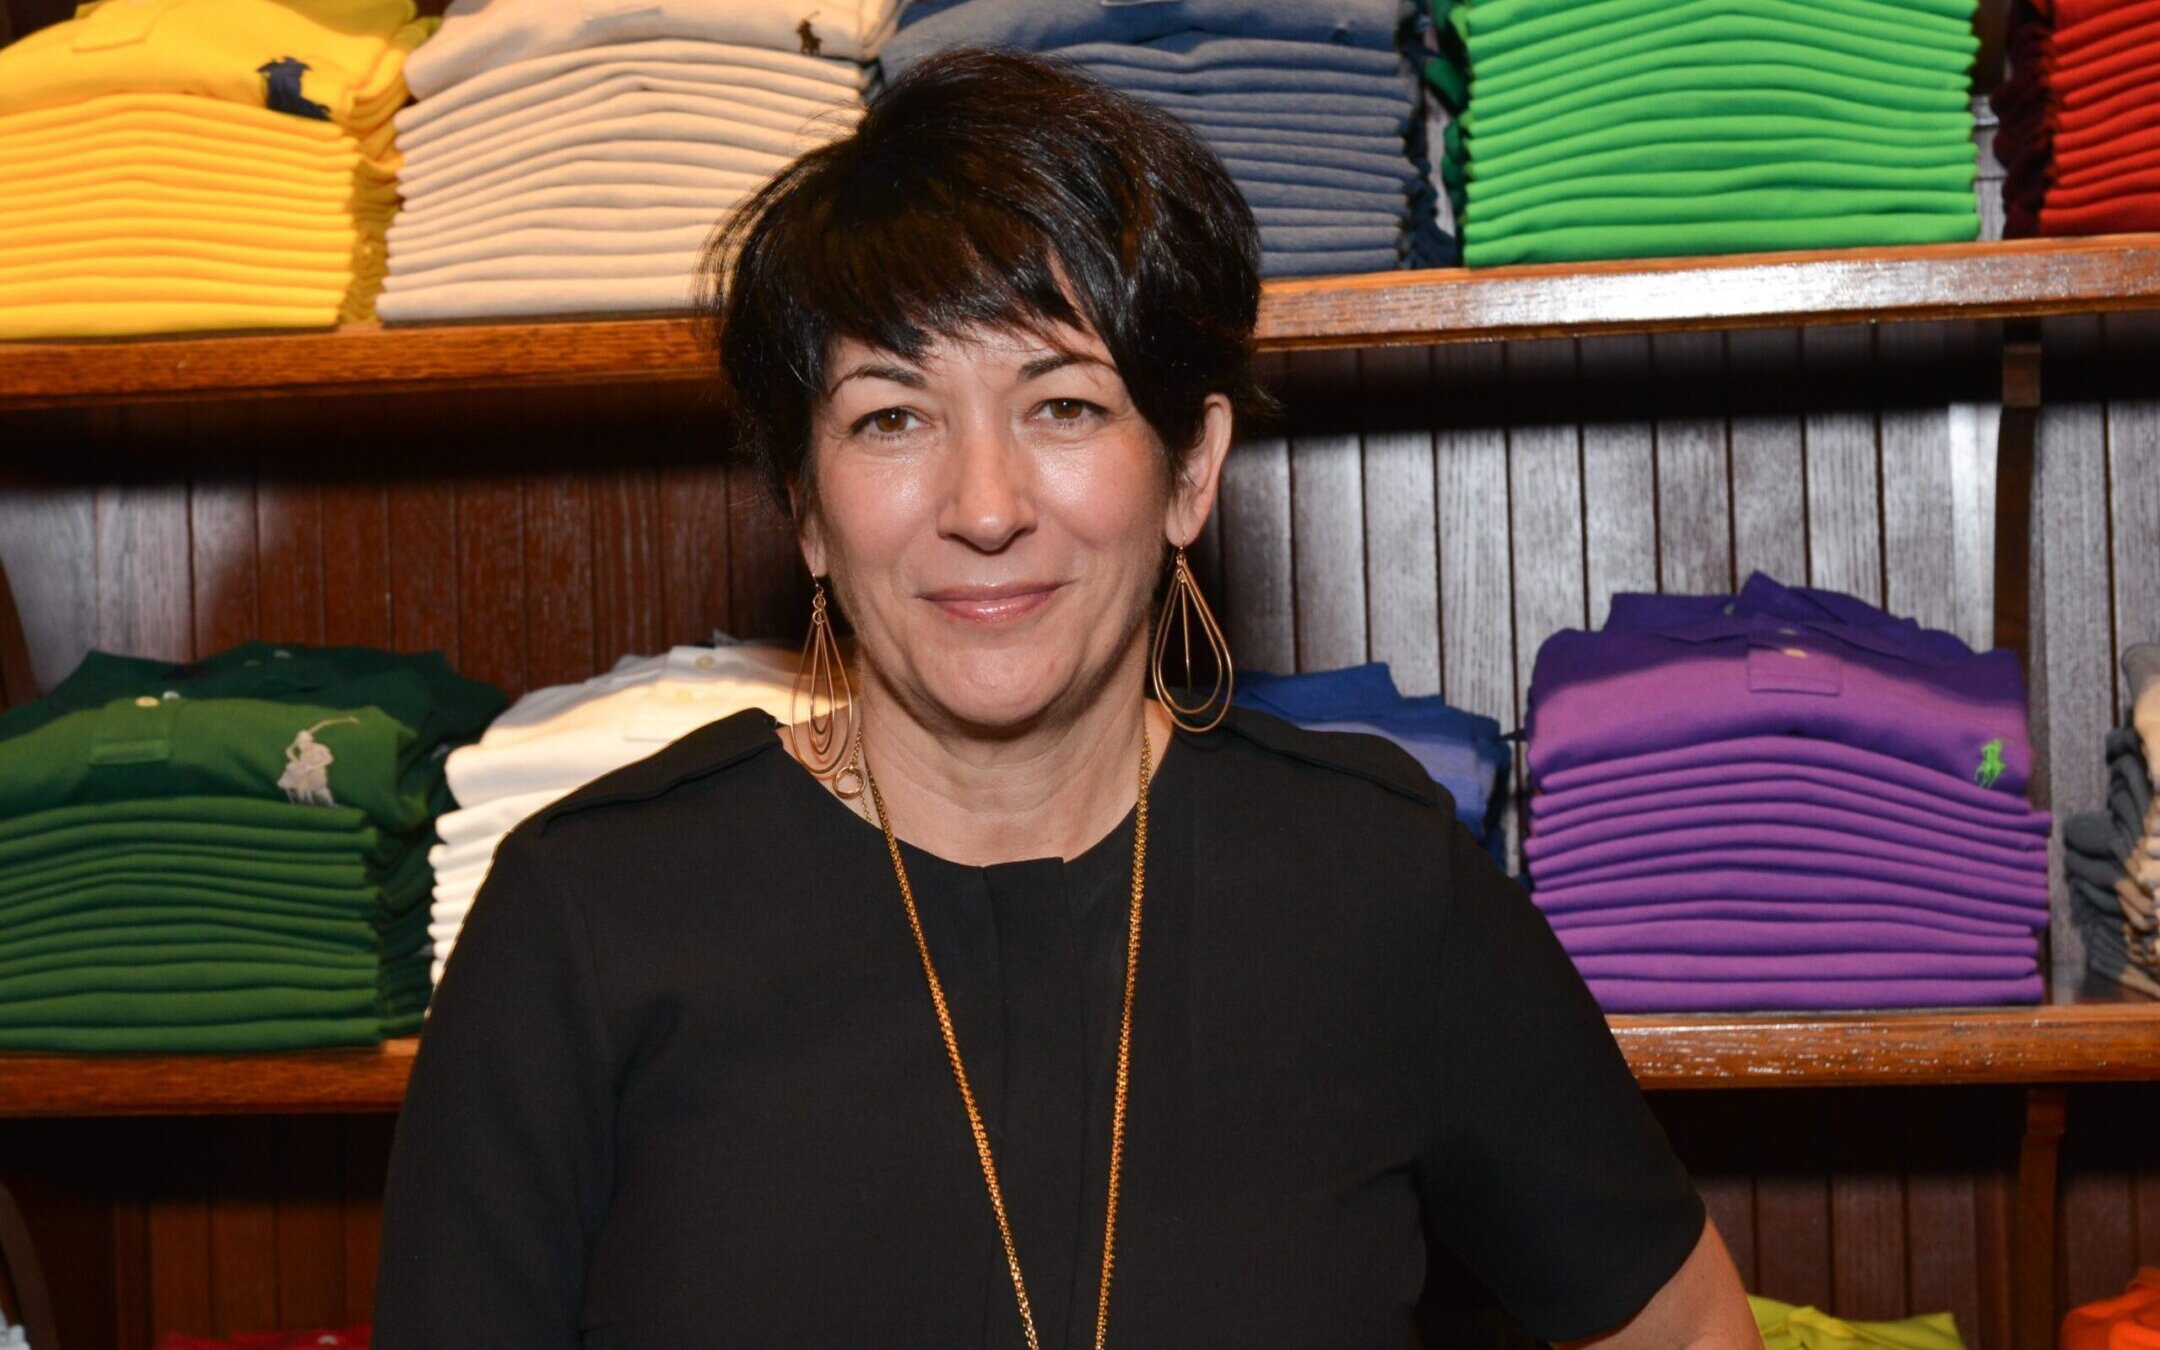 Ghislaine Maxwell attends a Polo Ralph Lauren event at the company’s store in New York City, Nov. 3, 2015. (Jared Siskin/Patrick McMullan via Getty Images)